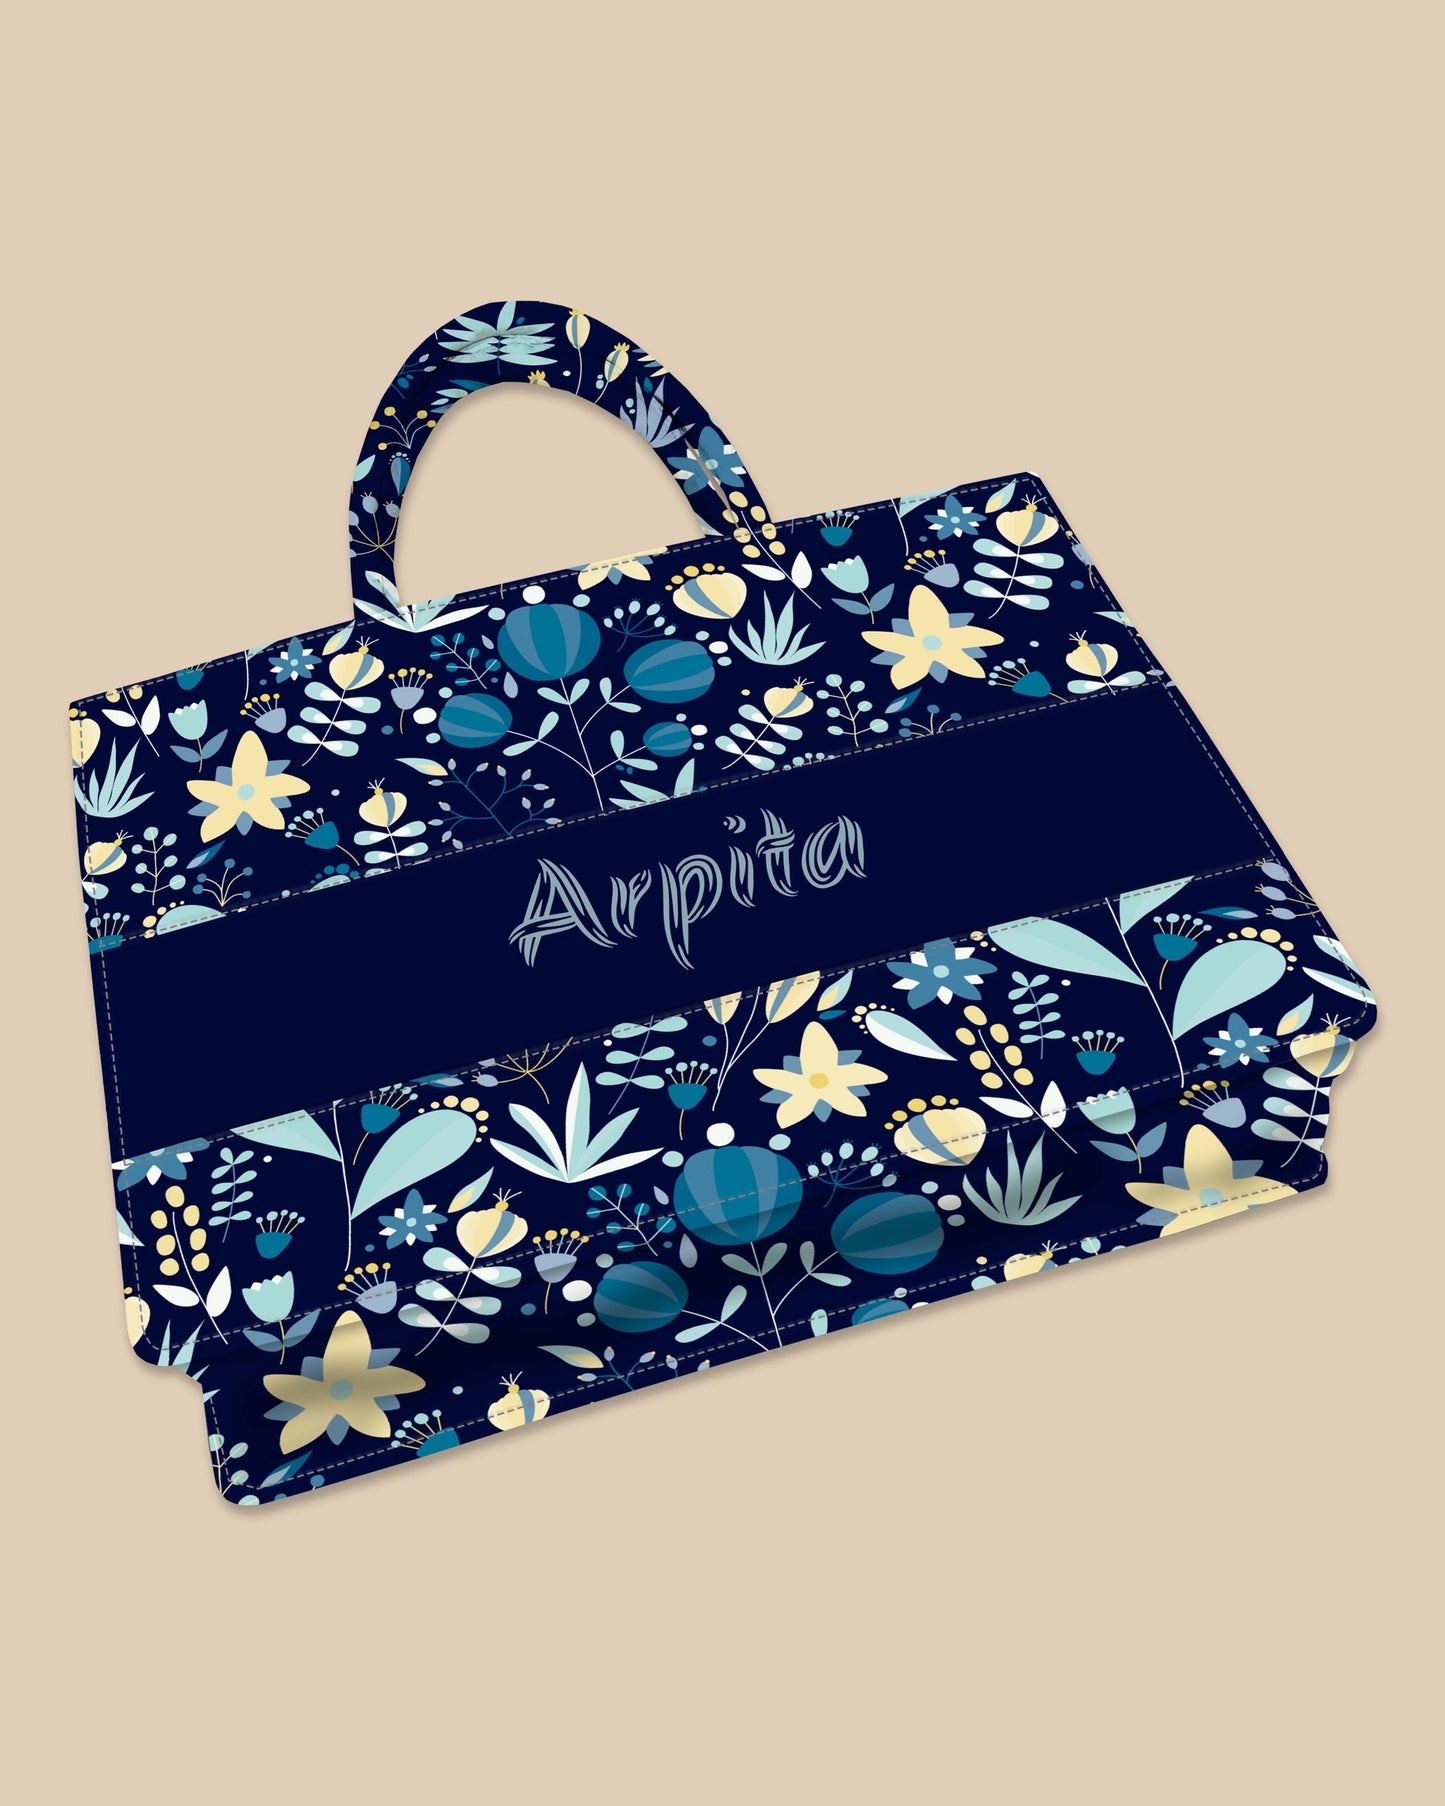 Customized Tote Bag Designed with Summer Flowers, Wild Flowering Plants And Berries